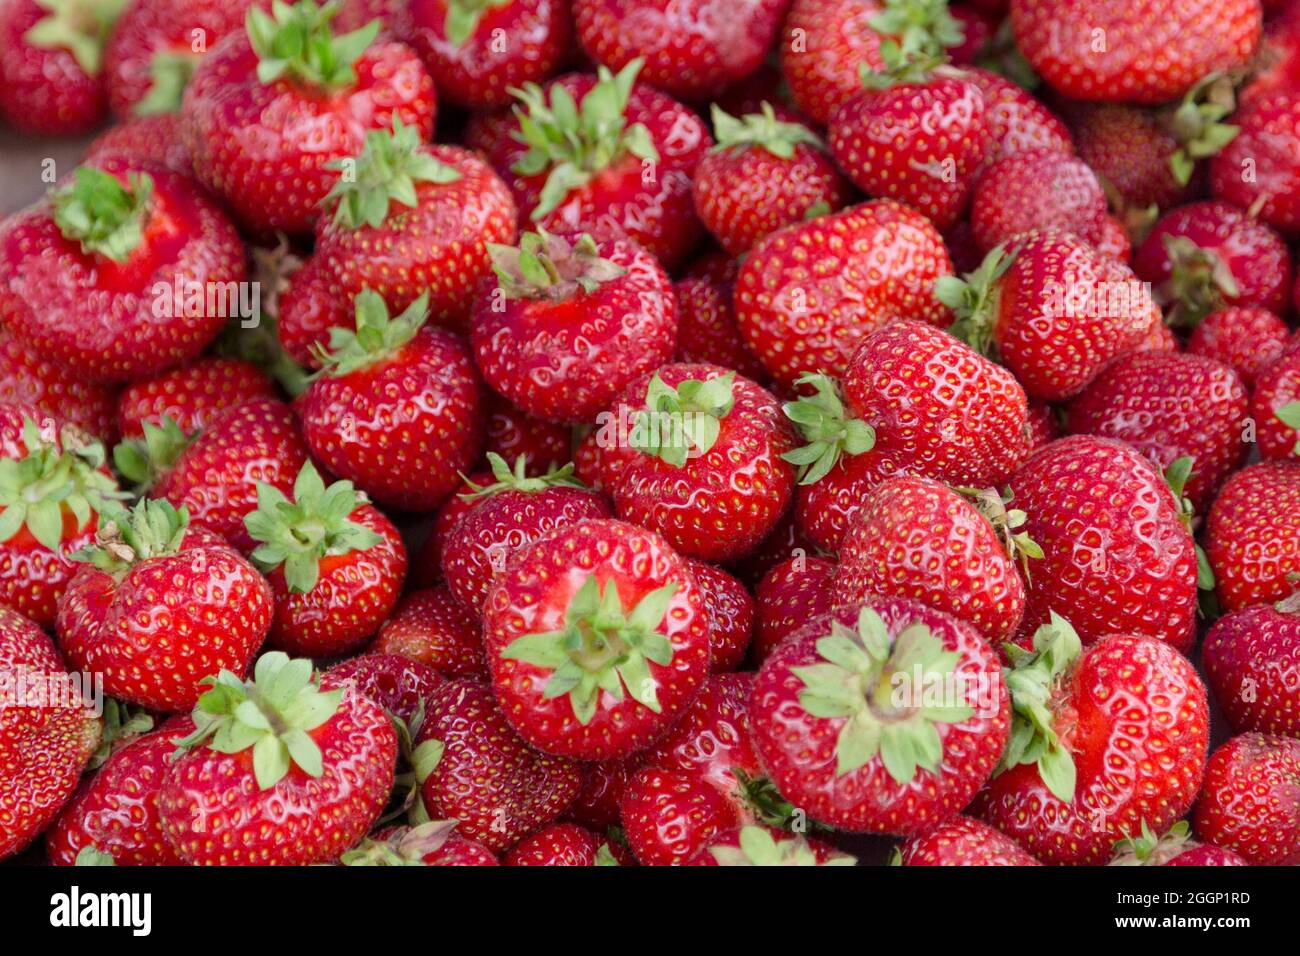 Huge red juicy ripe strawberries at the market in the city, harvest at the dacha. Stock Photo